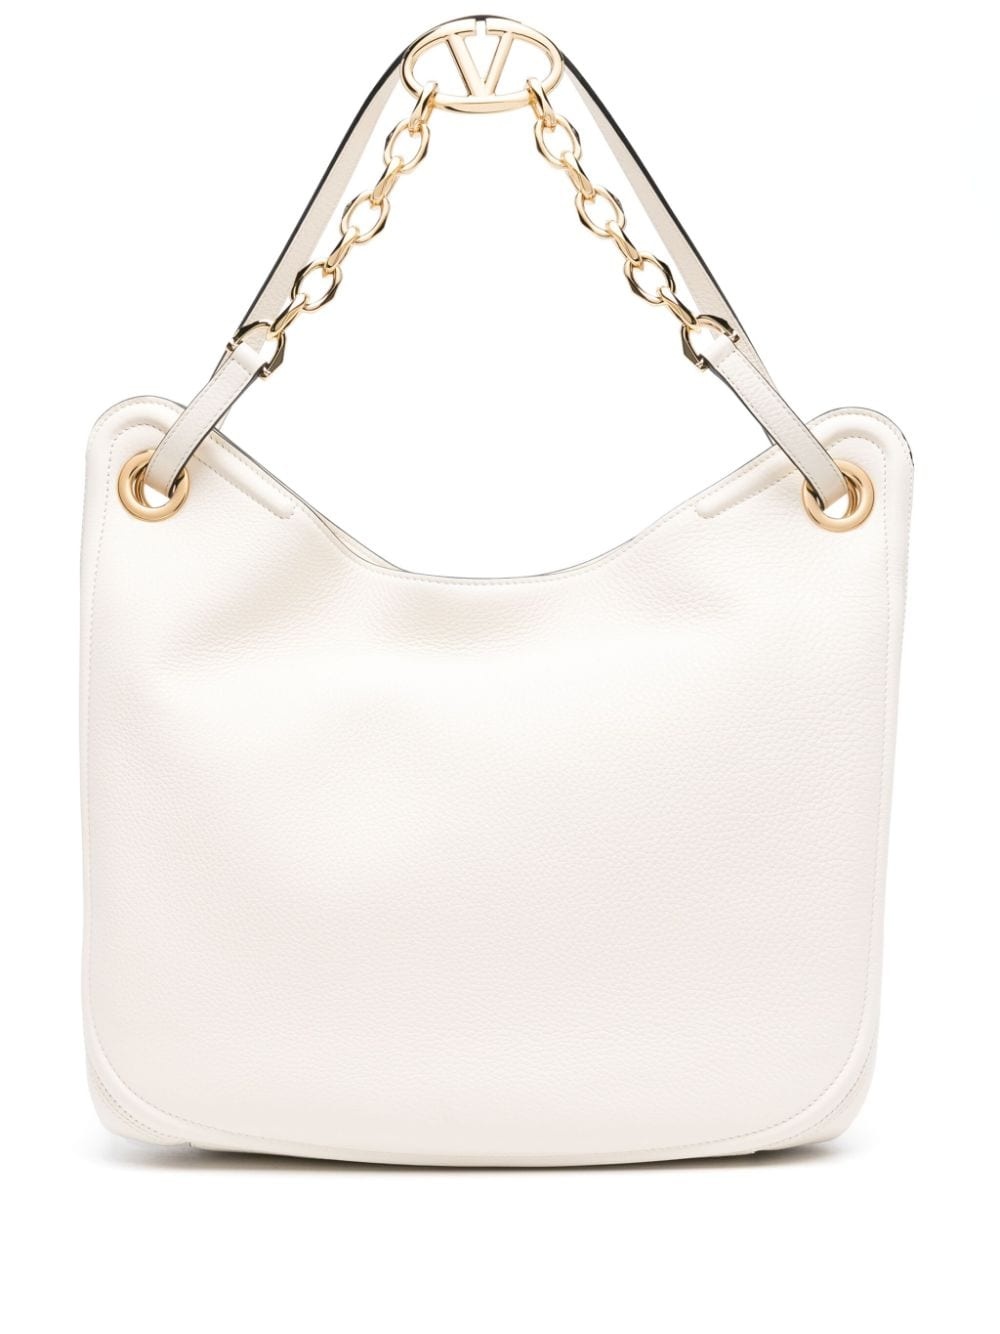 VLogo Moon leather tote bag - 1